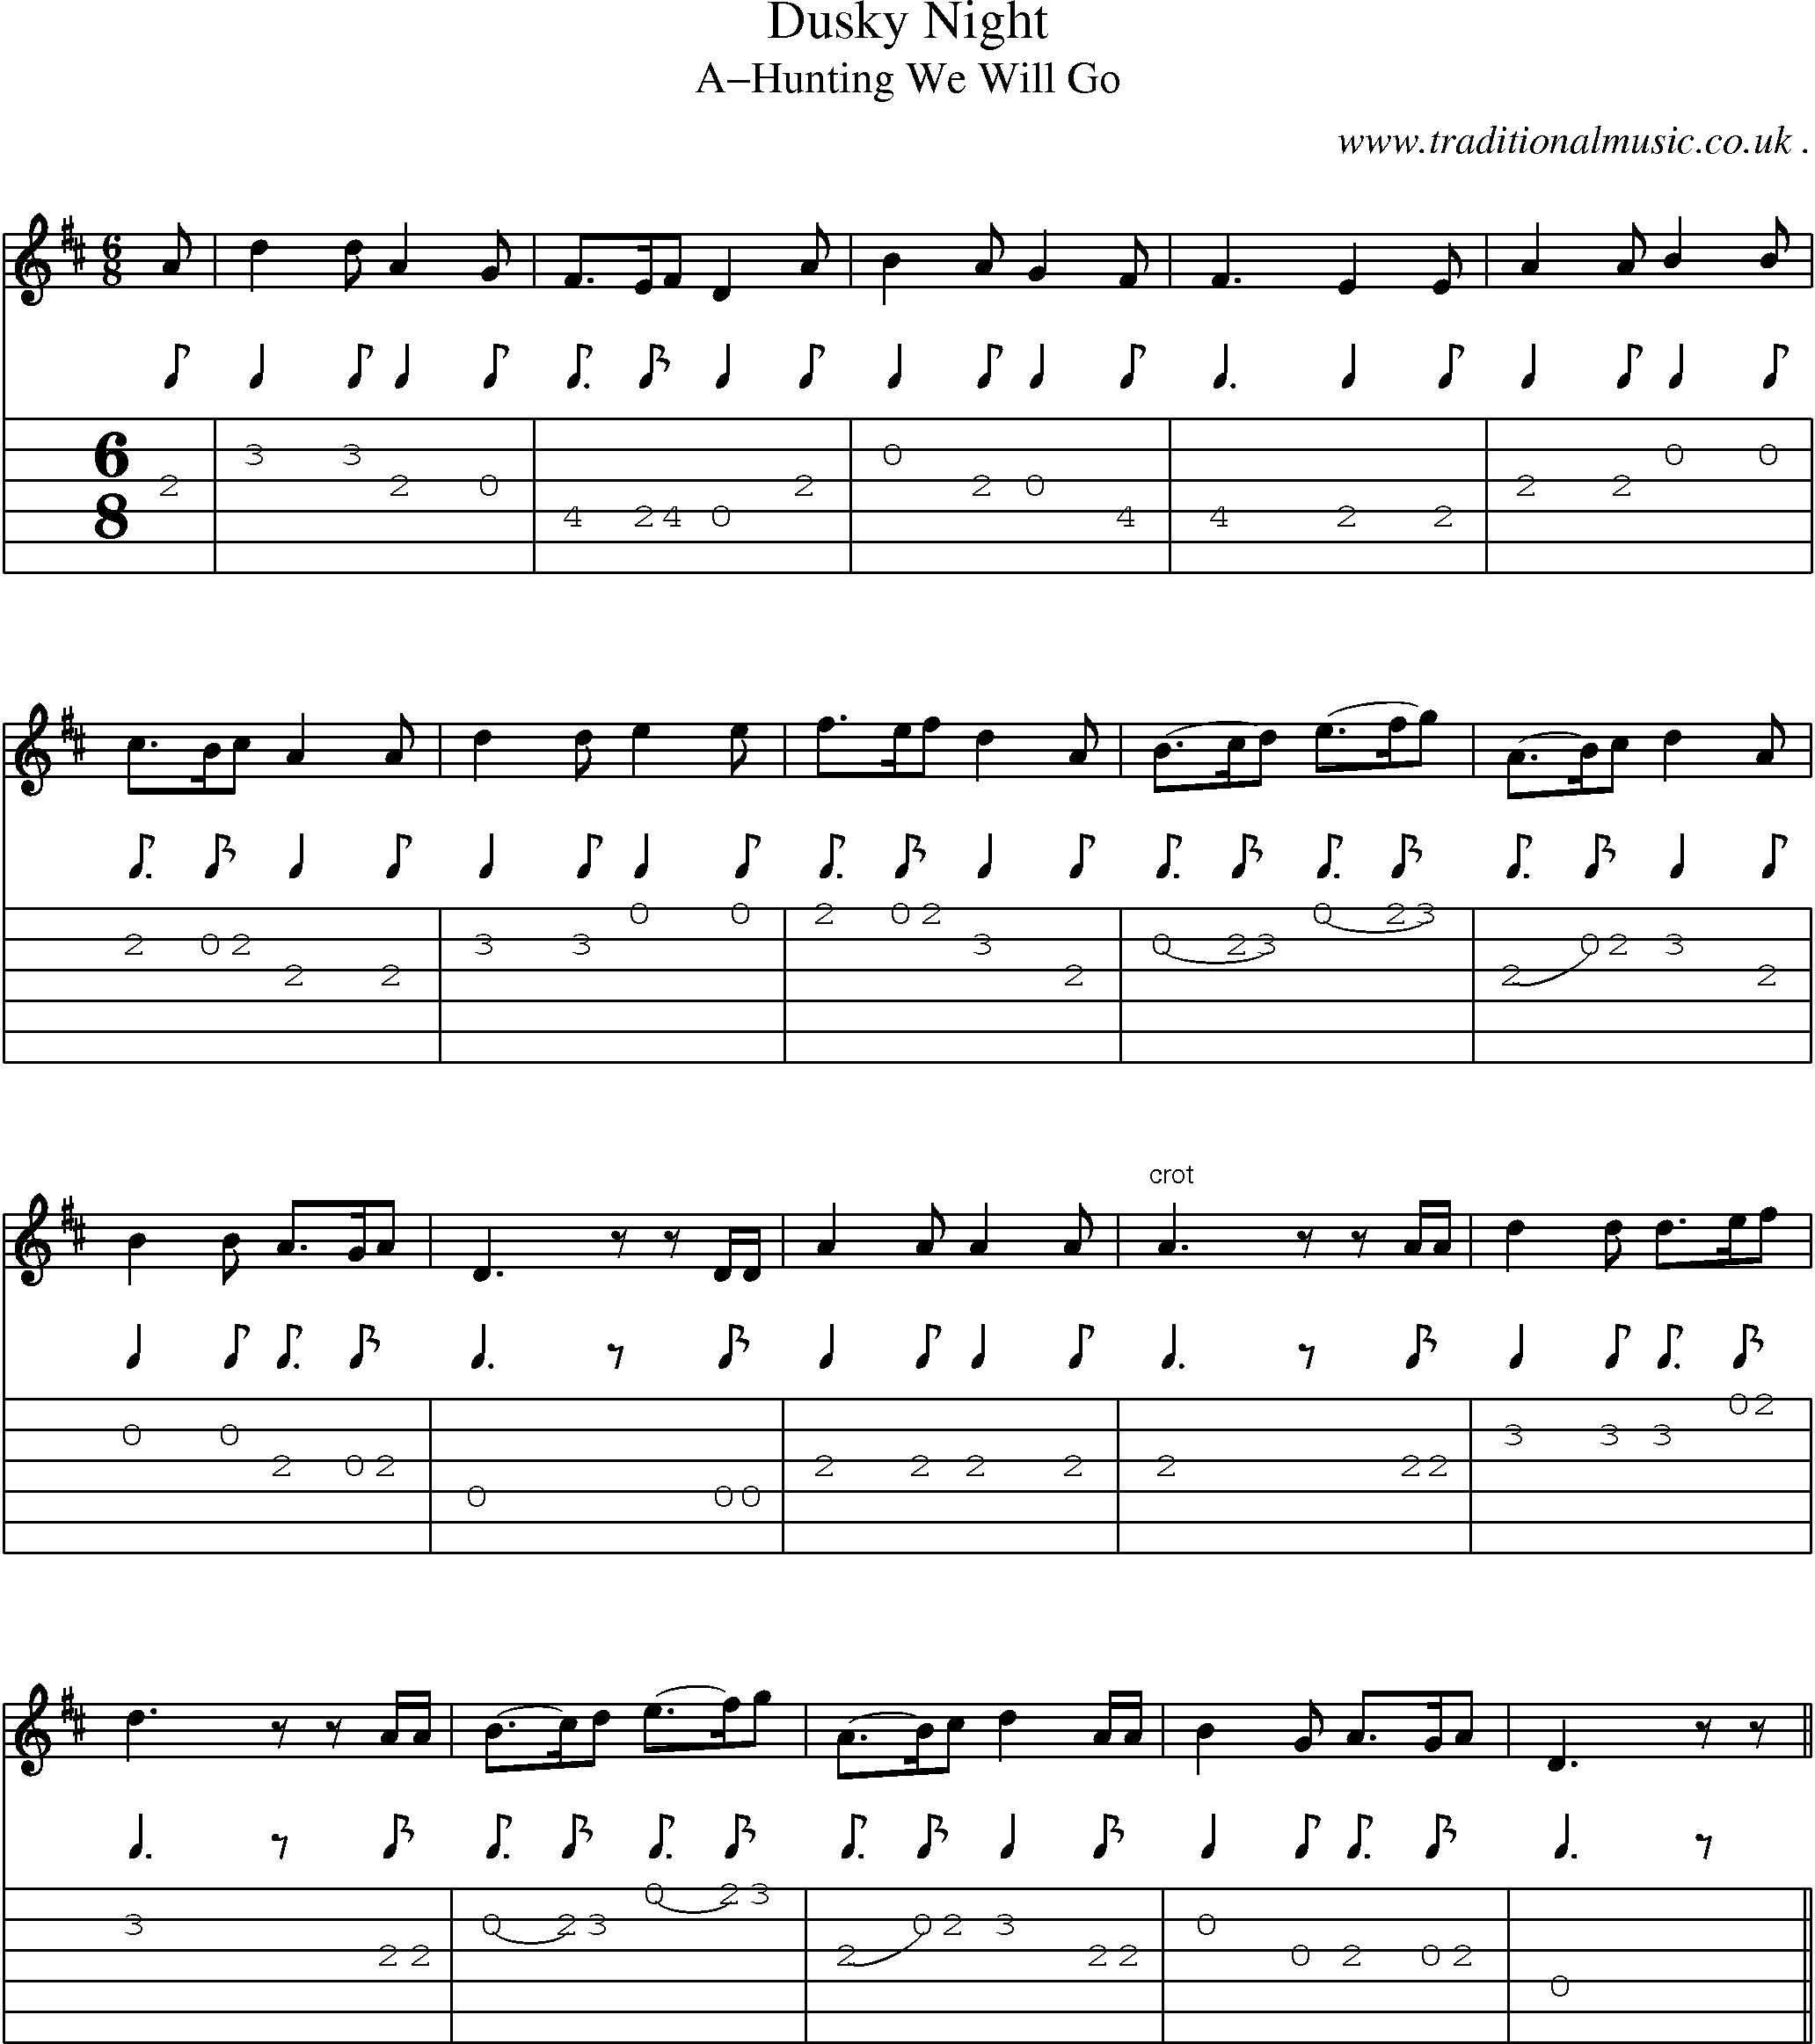 Sheet-Music and Guitar Tabs for Dusky Night